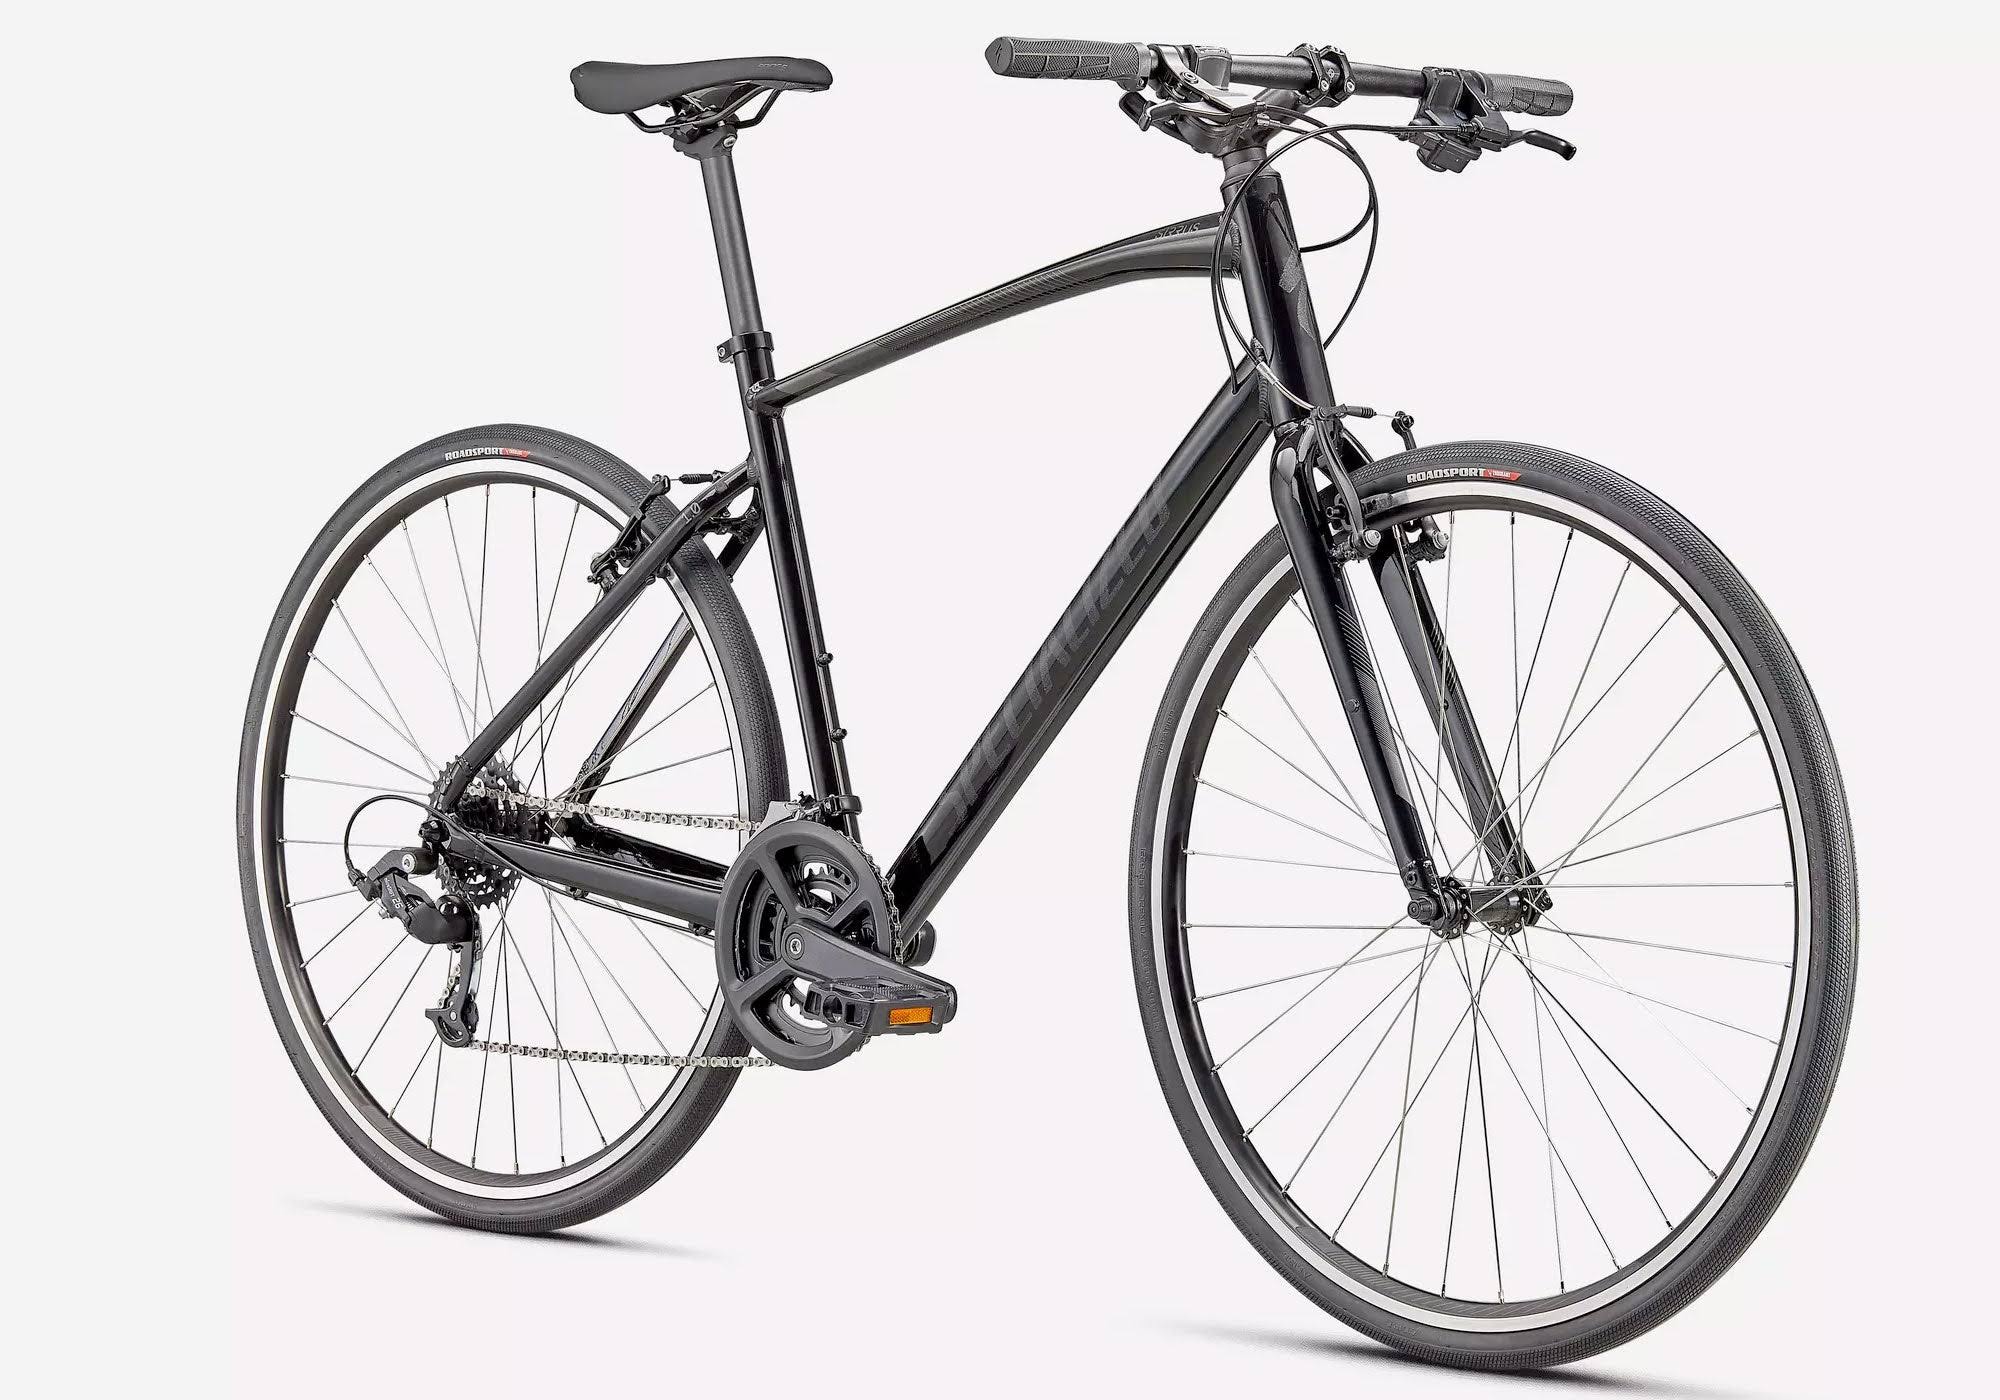 Specialized Sirrus 1.0 in Gloss Black / Charcoal / Satin Black Reflective, Fitness Active Bike